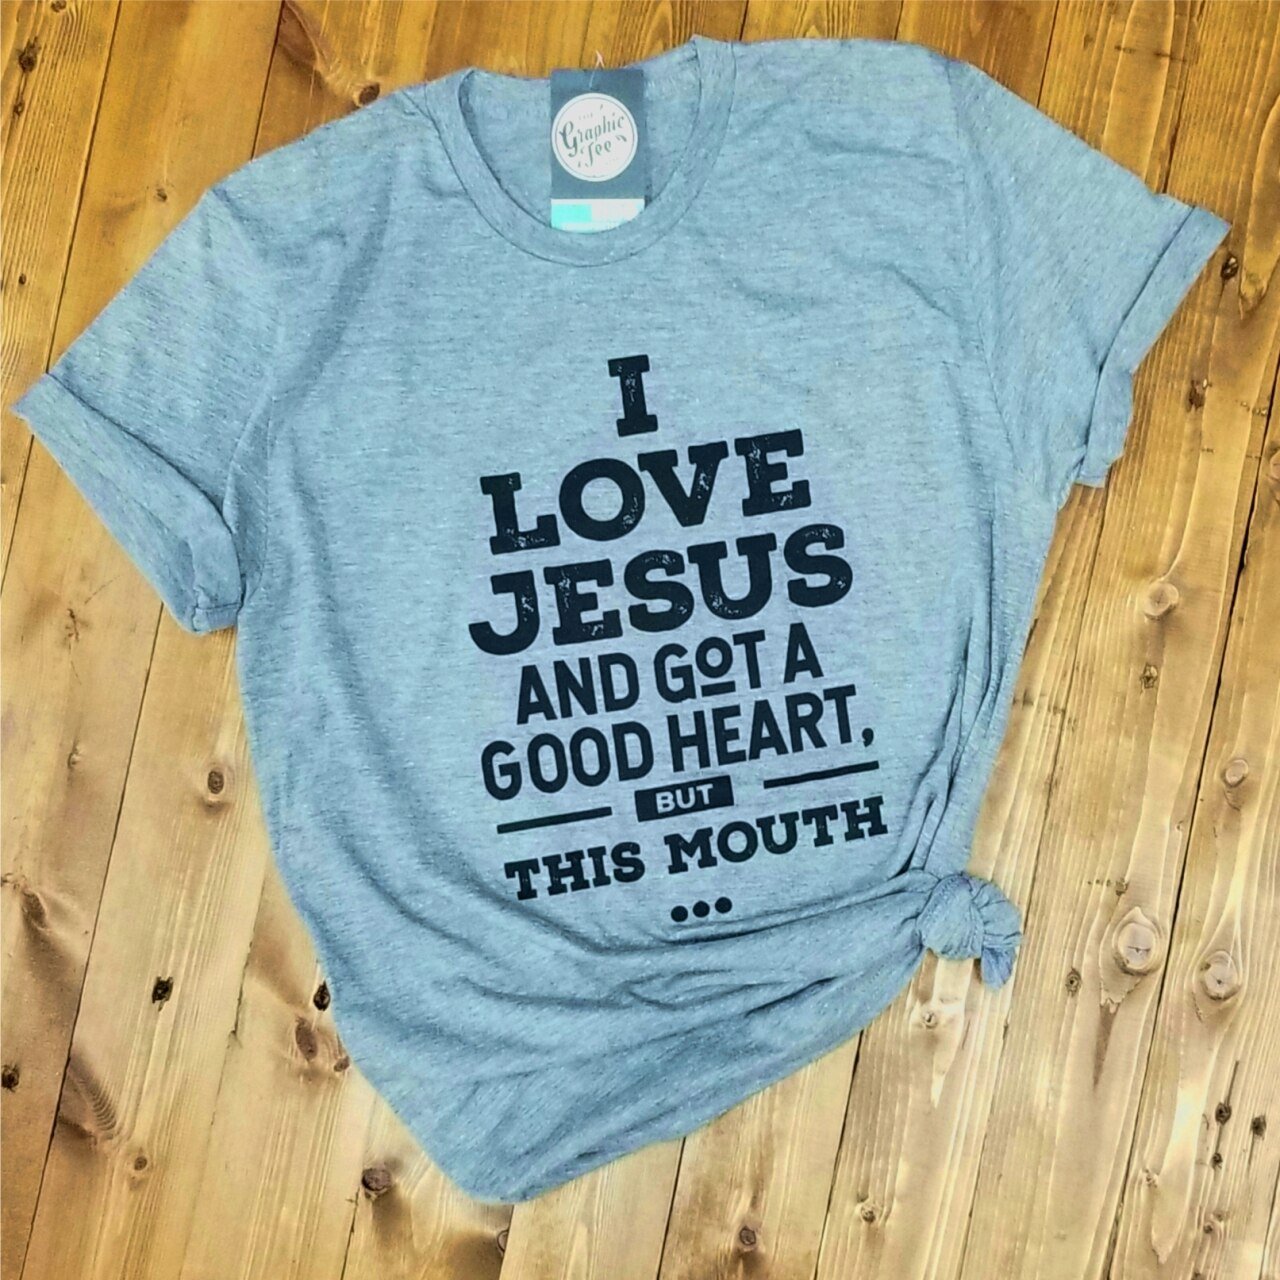 I Love Jesus and Got A Good Heart, but This Mouth - Grey Tee - The Graphic Tee